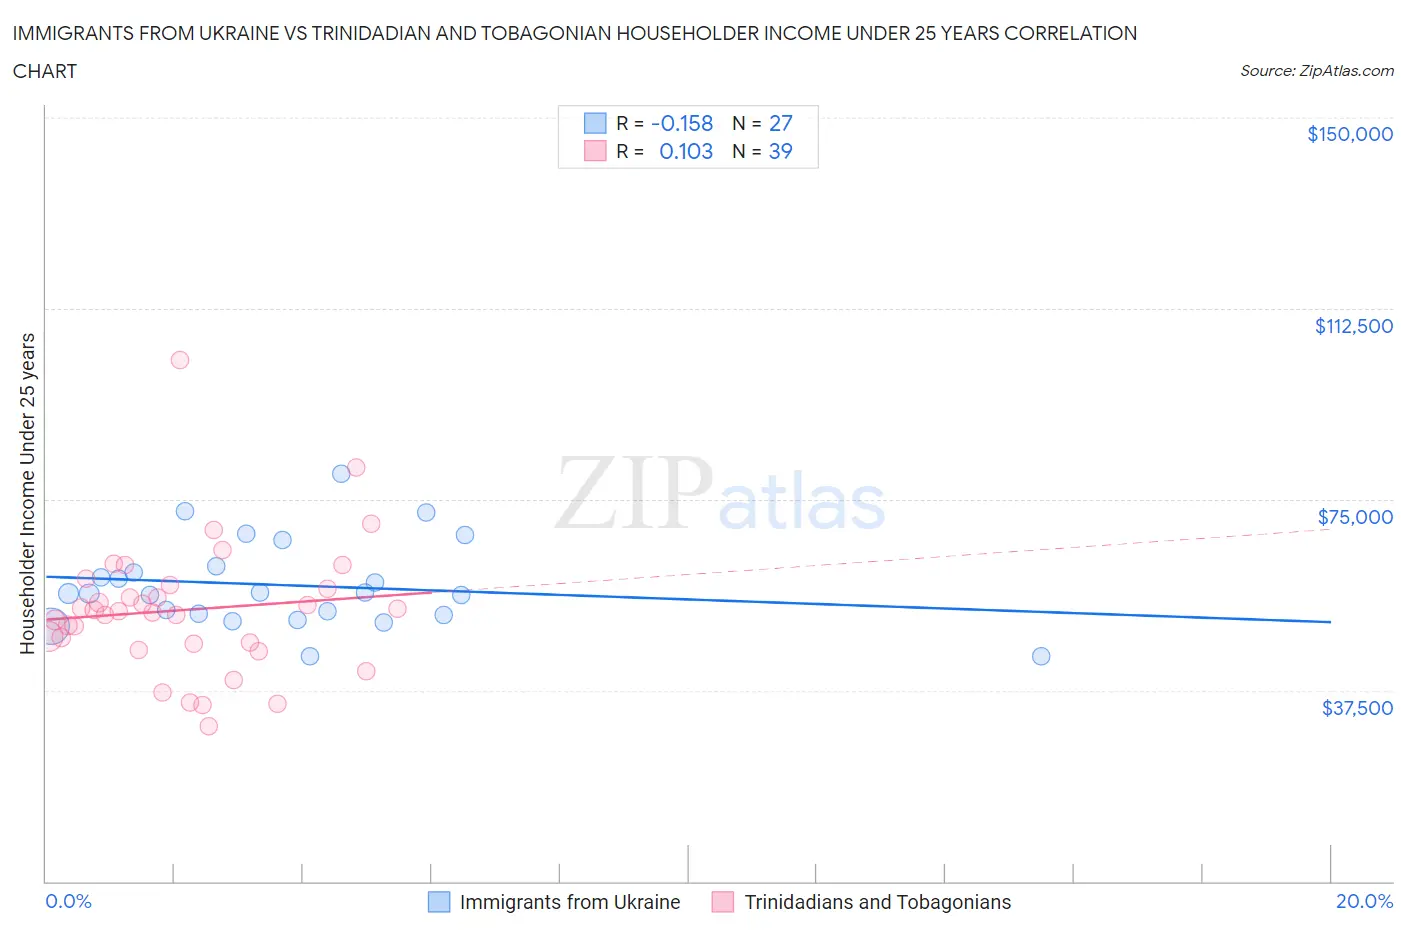 Immigrants from Ukraine vs Trinidadian and Tobagonian Householder Income Under 25 years